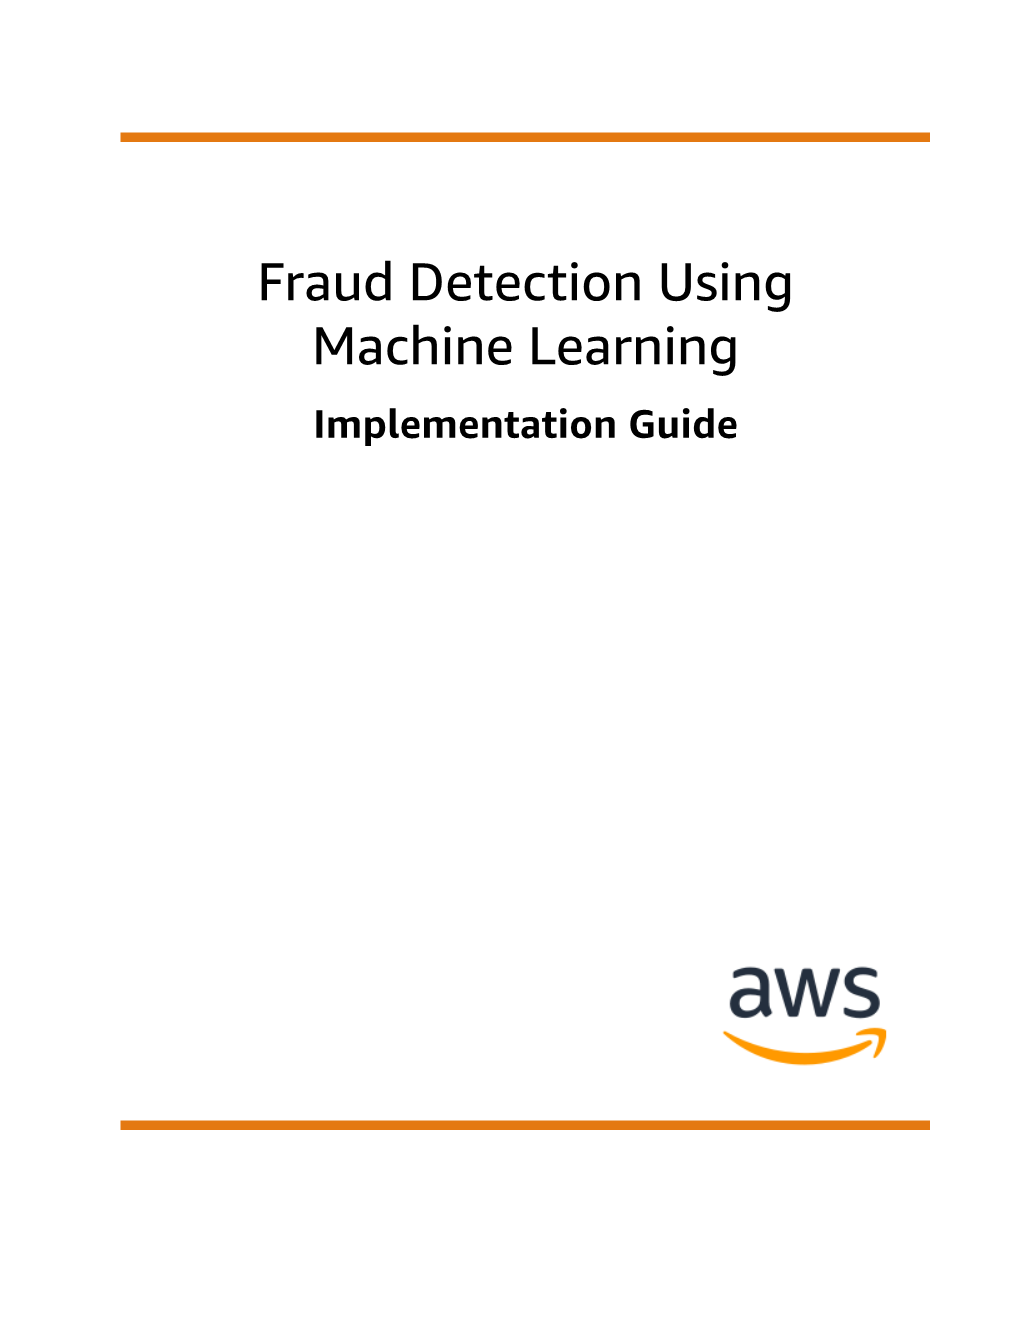 Fraud Detection Using Machine Learning Implementation Guide Fraud Detection Using Machine Learning Implementation Guide